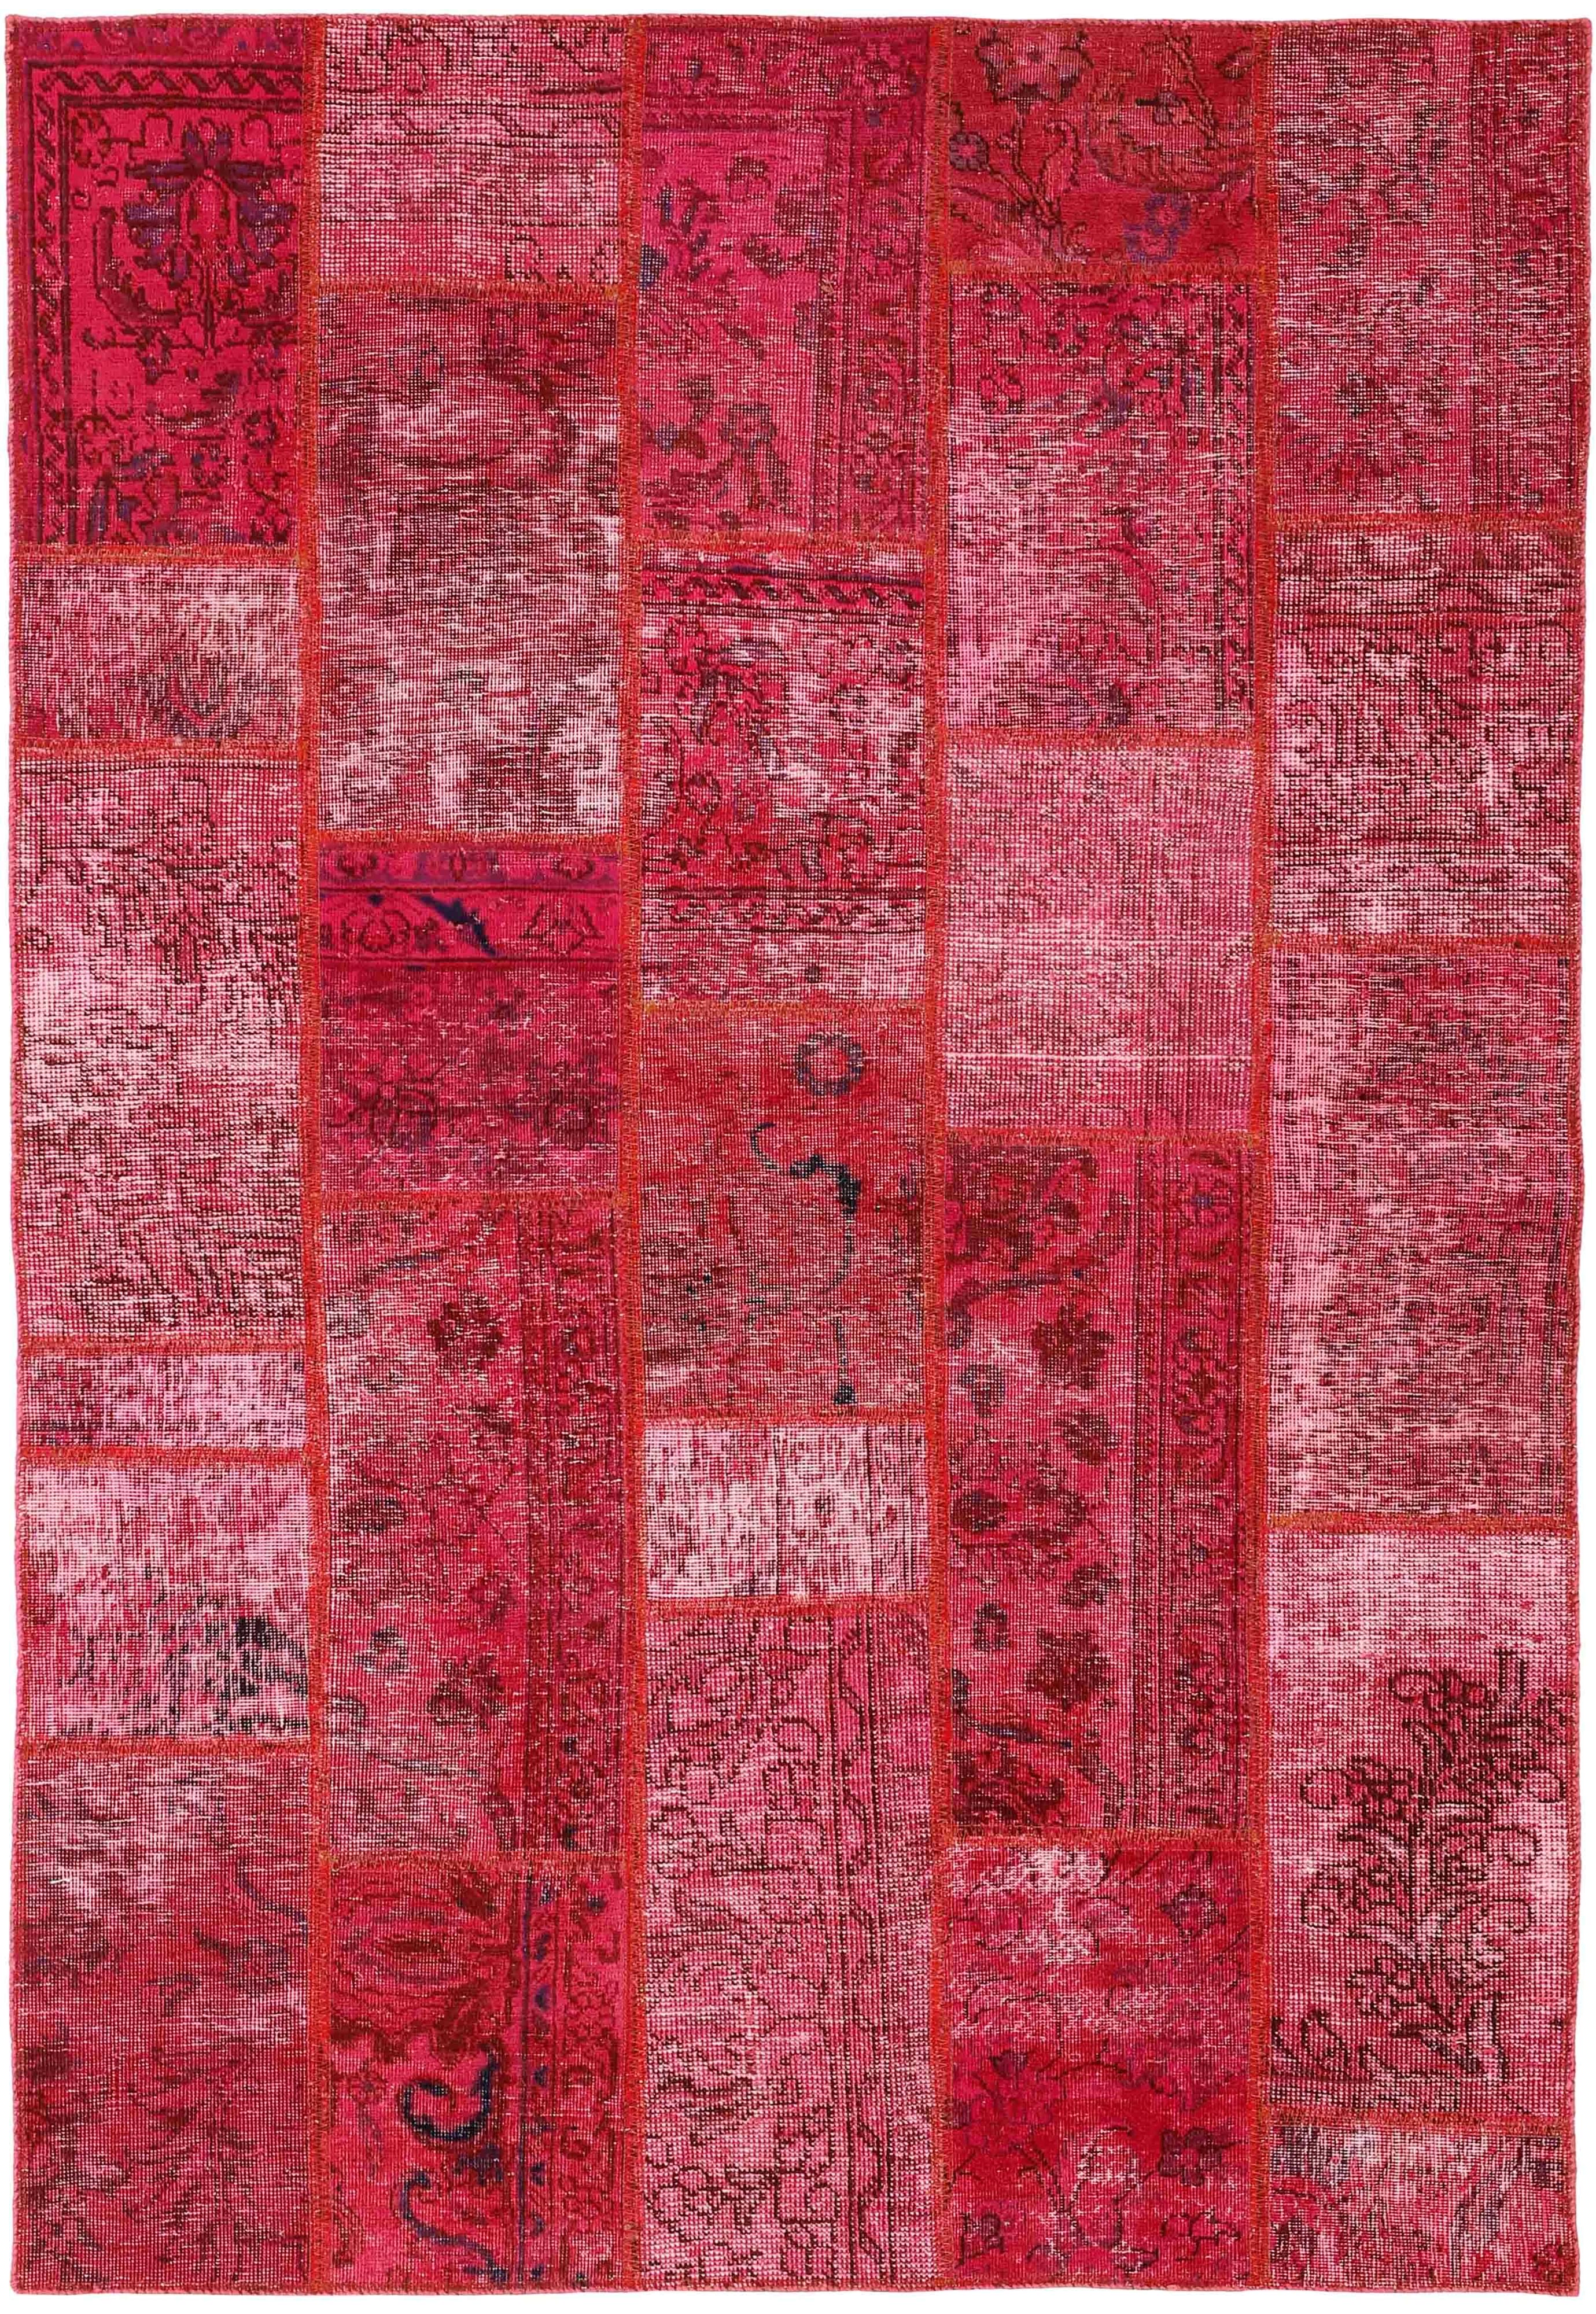 Authentic pink patchwork persian rug